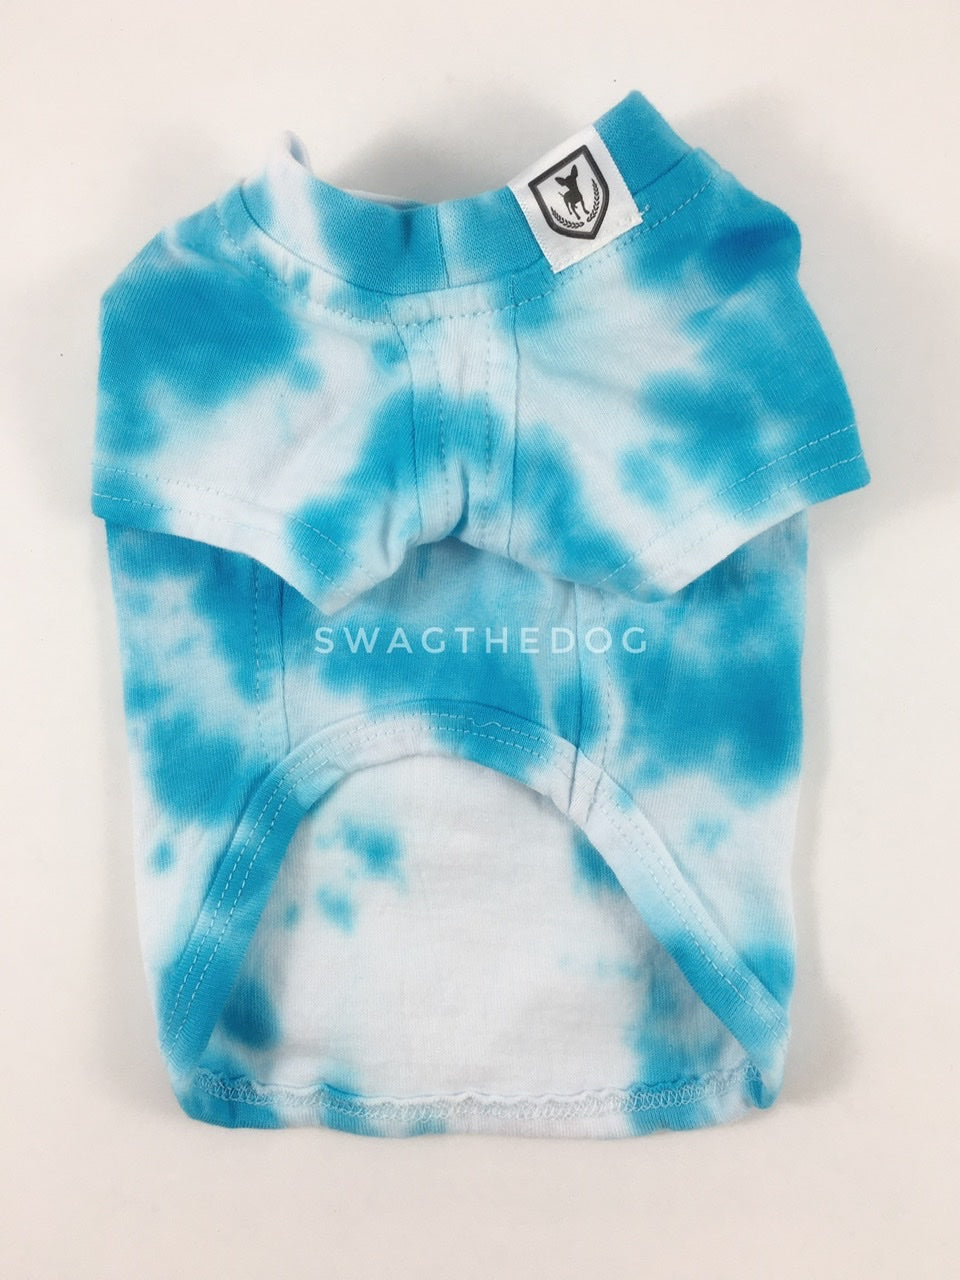 Swagadelic Sky Blue Tie Dye Tee - Product front view. The hand tie-dyed tee with Sky Blue